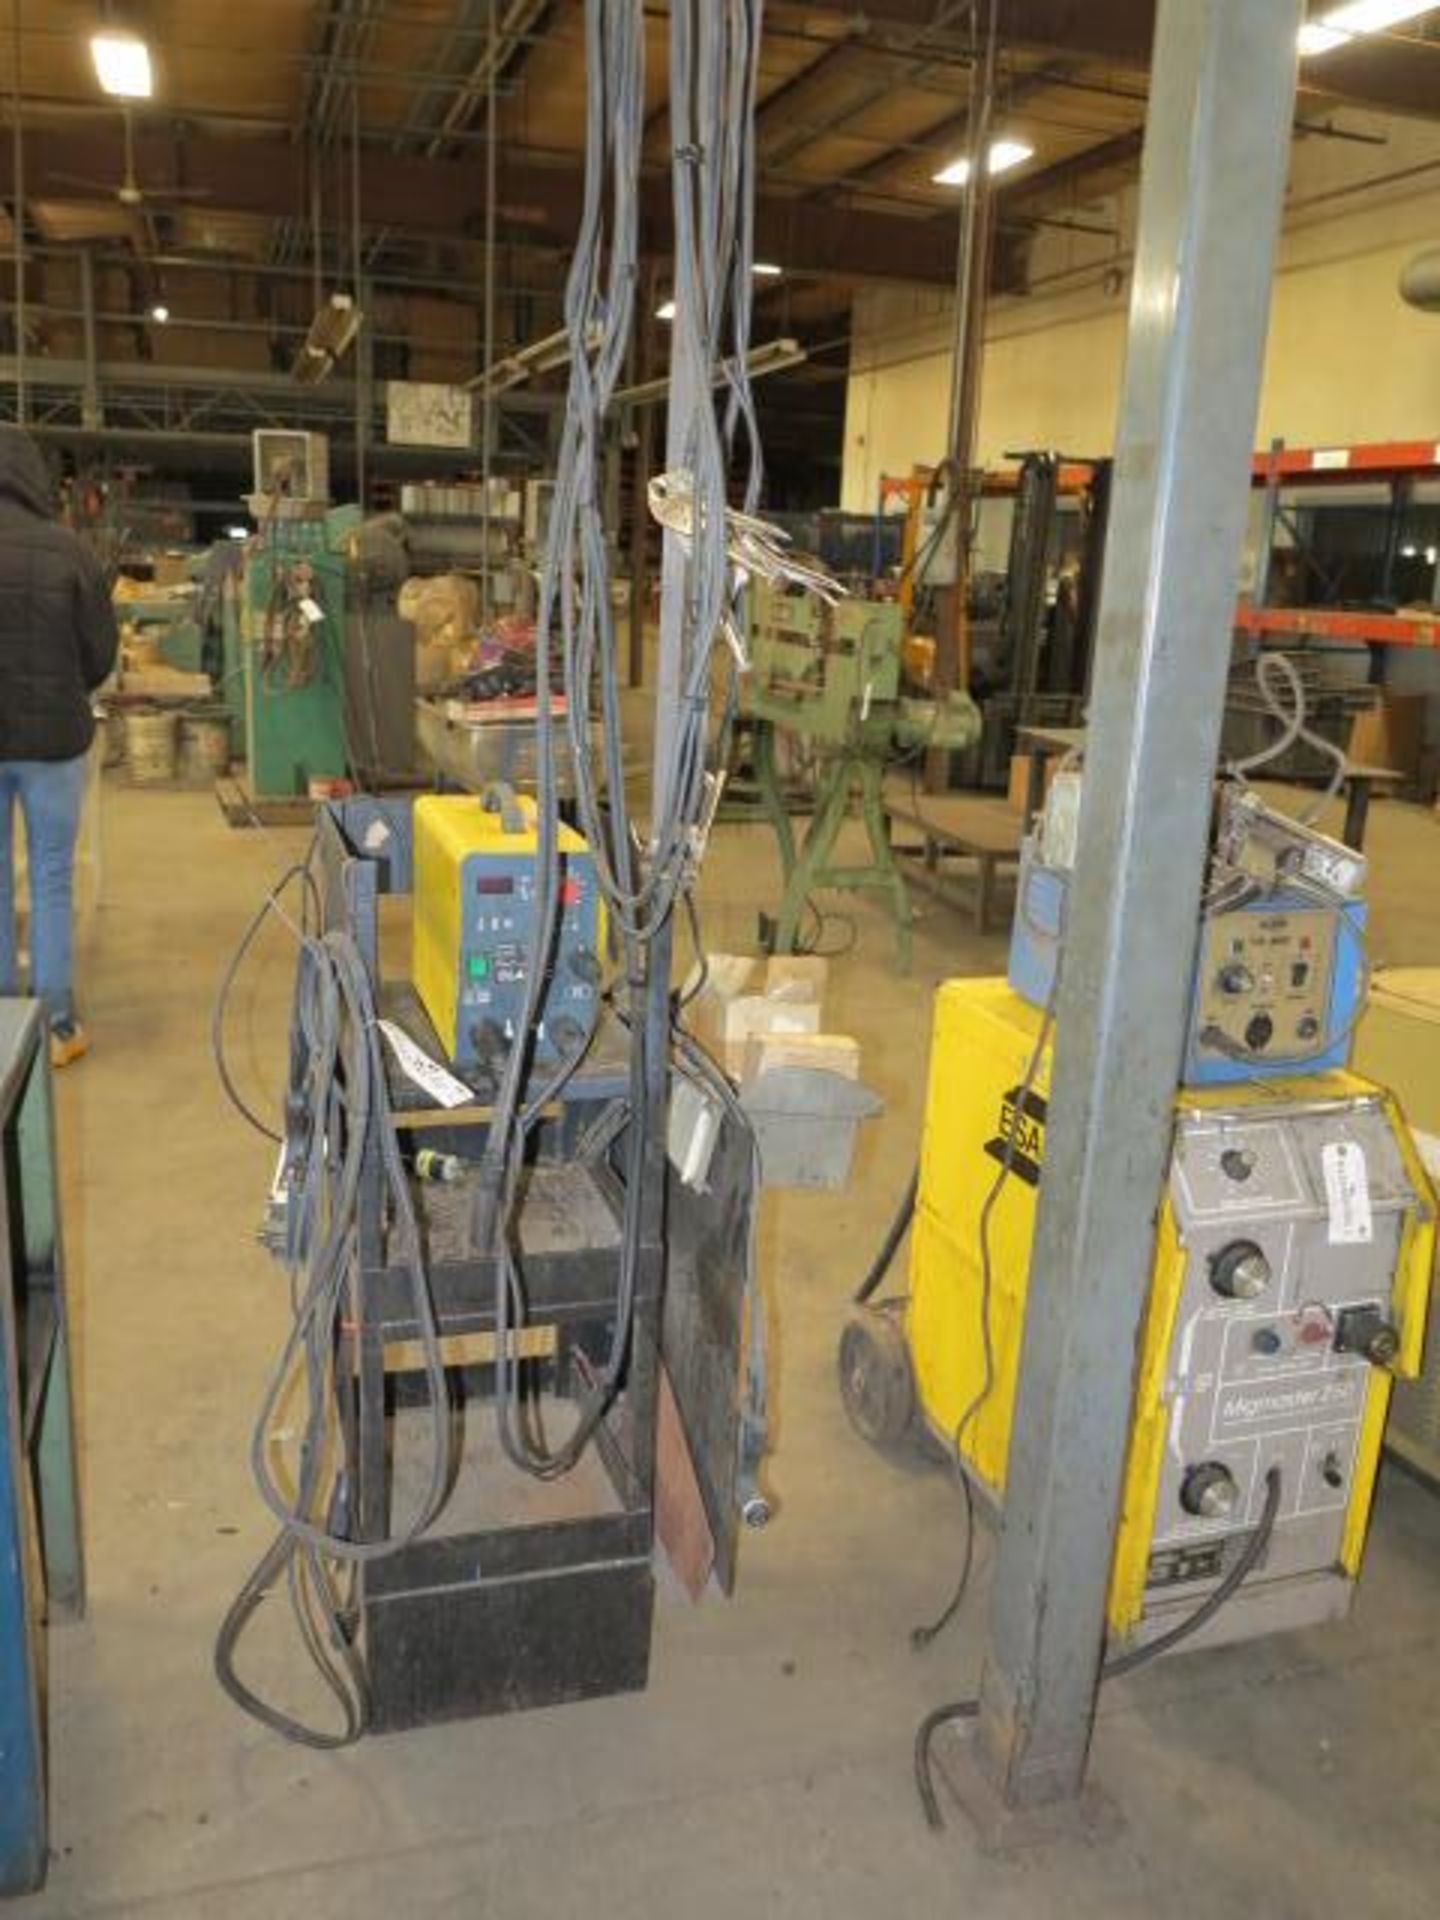 Cutlass Classic Stud Welder S/N 070503 with (2) Guns and Stand Location: Swansea MA